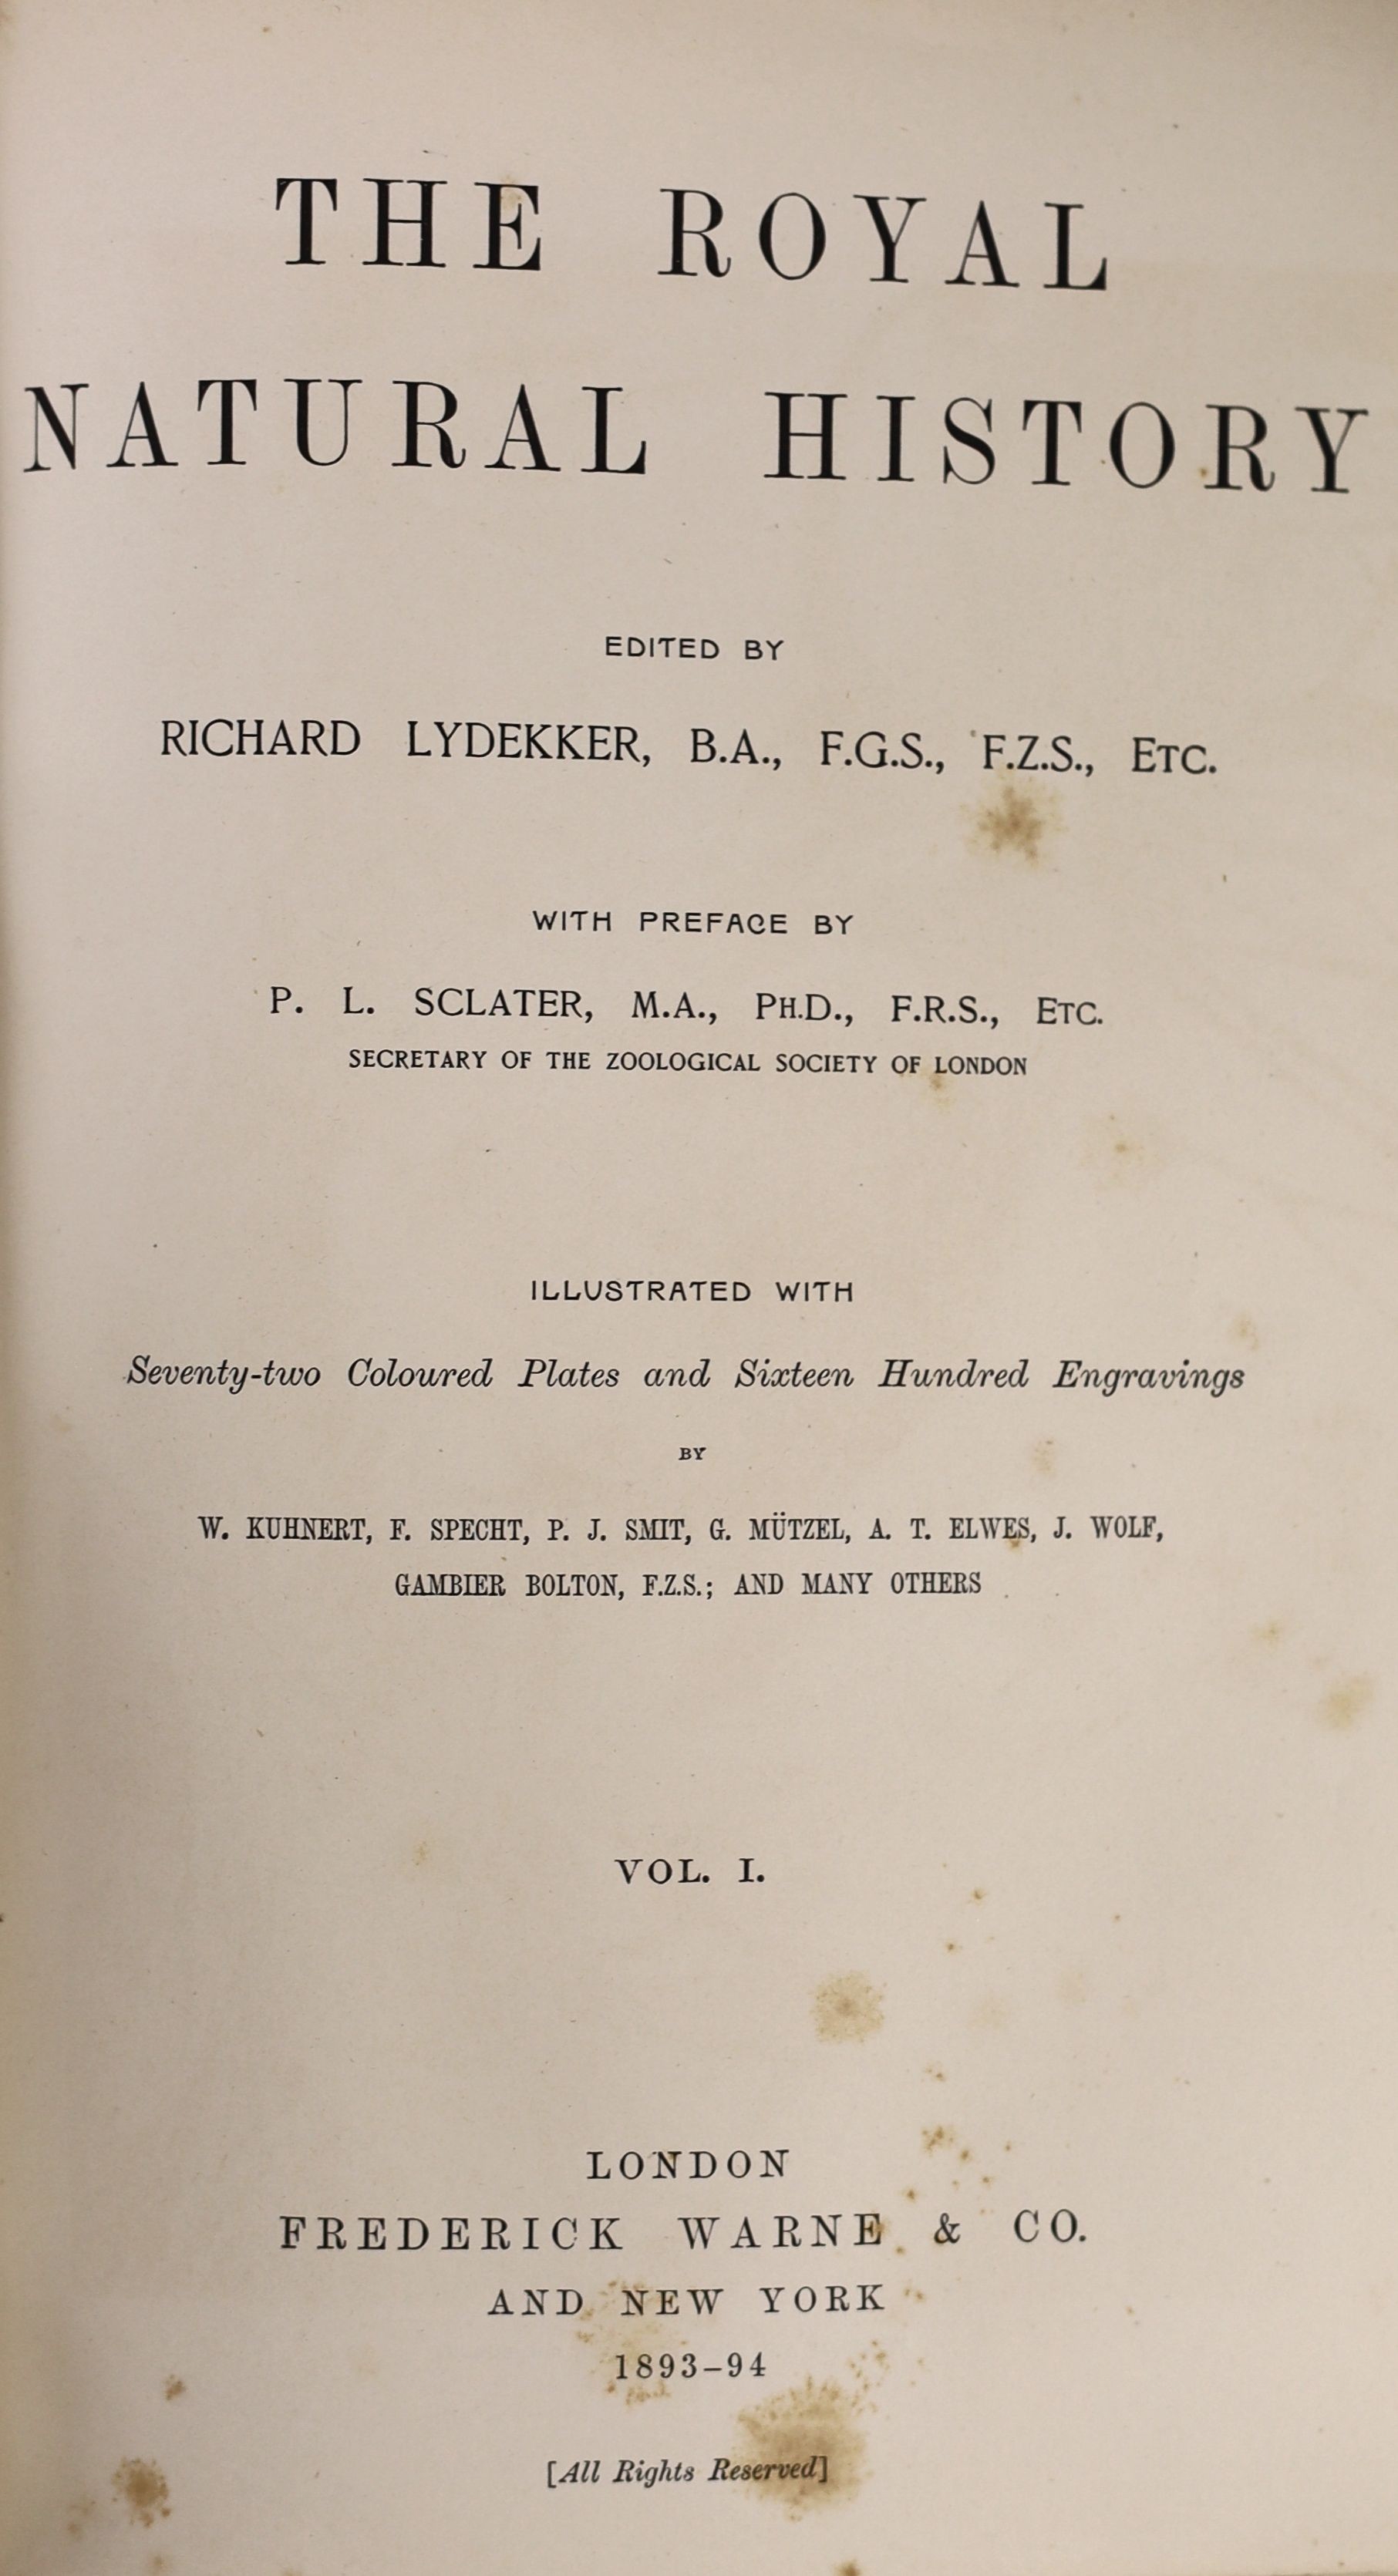 Lydekker, Richard (editor) - The Royal Natural History, 1st edition, 6 vols, 4to, half green morocco, with 66 chromolithographs, Frederick Warne & Co., London, 1893-96